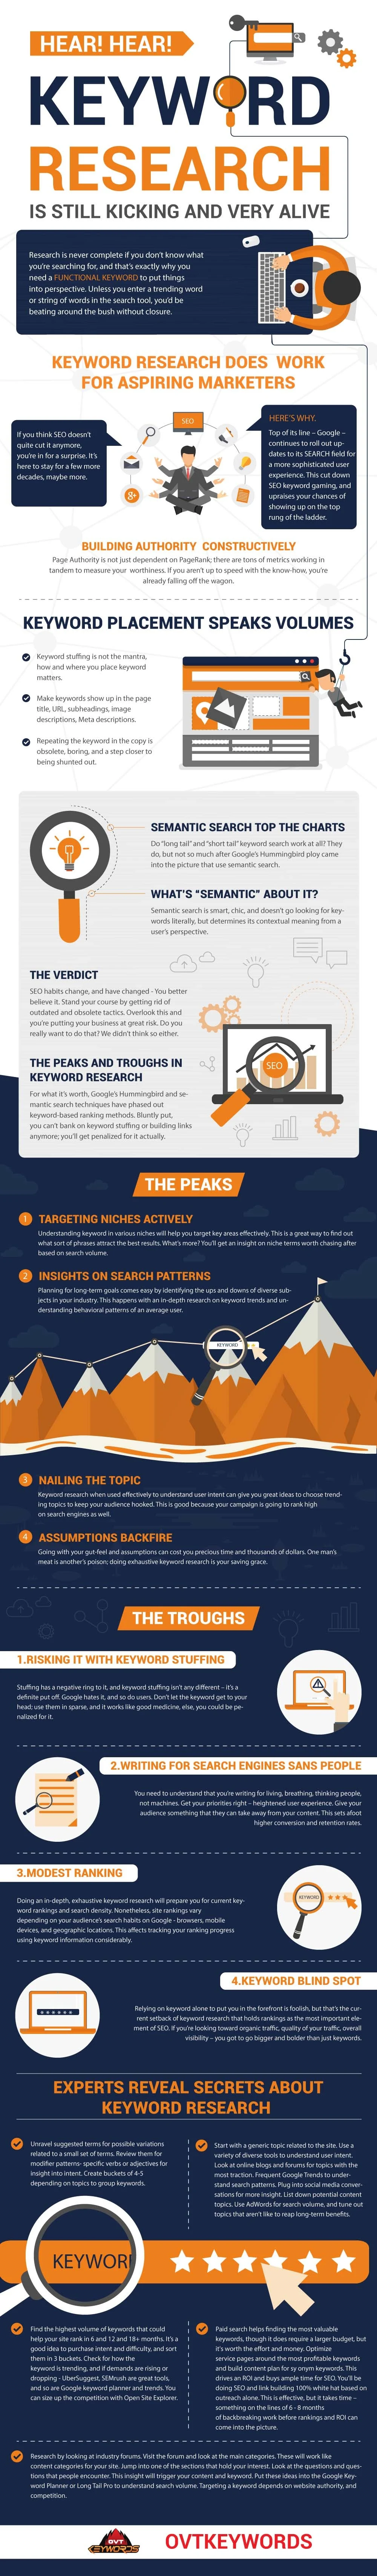 Keyword Research: Still Kicking and Very Alive - #Infographic